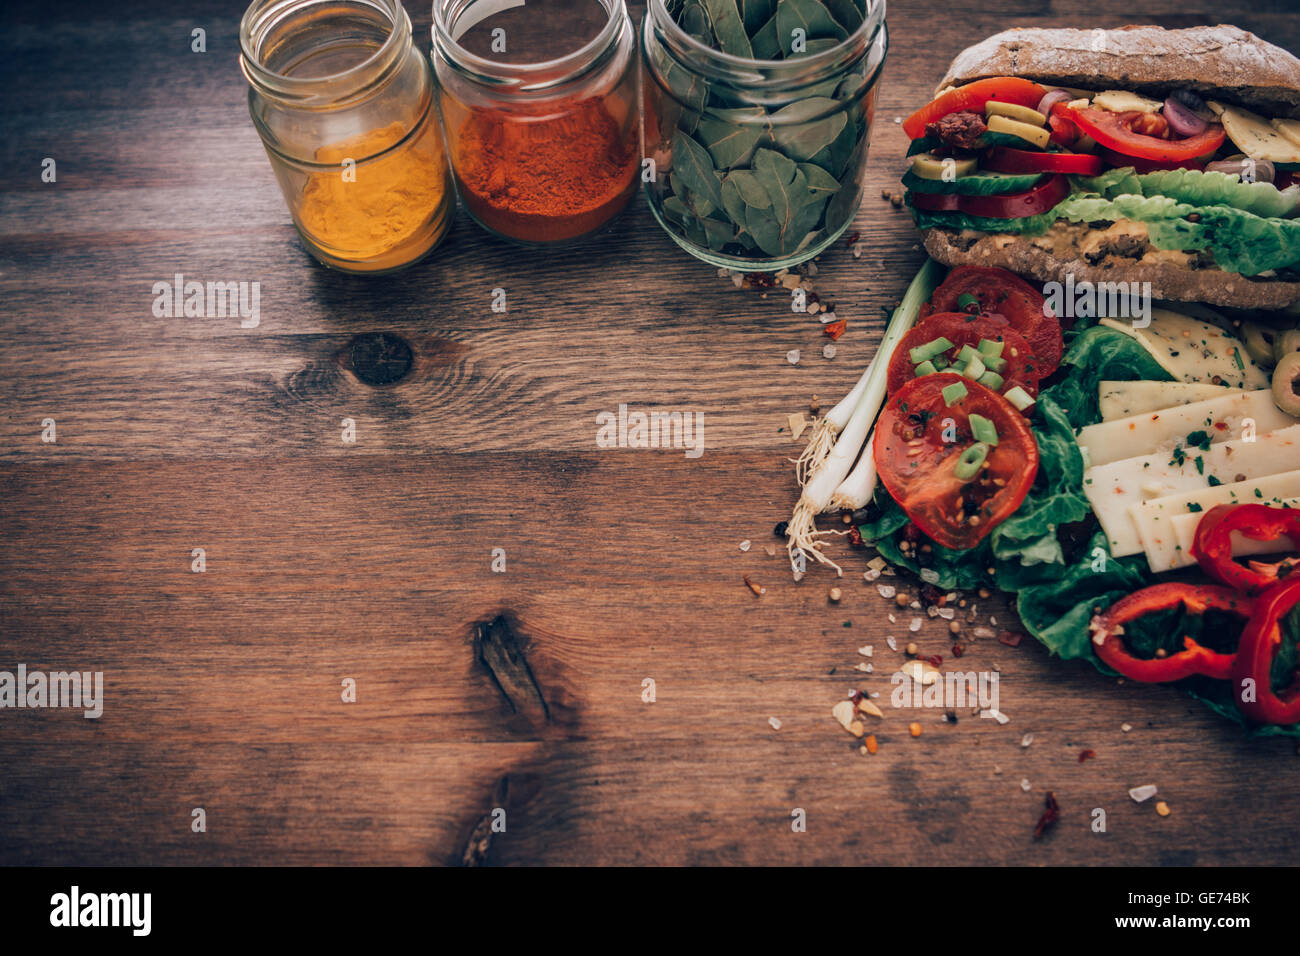 Beauty shots of food on a rustic setting with room for type, copy space. Stock Photo